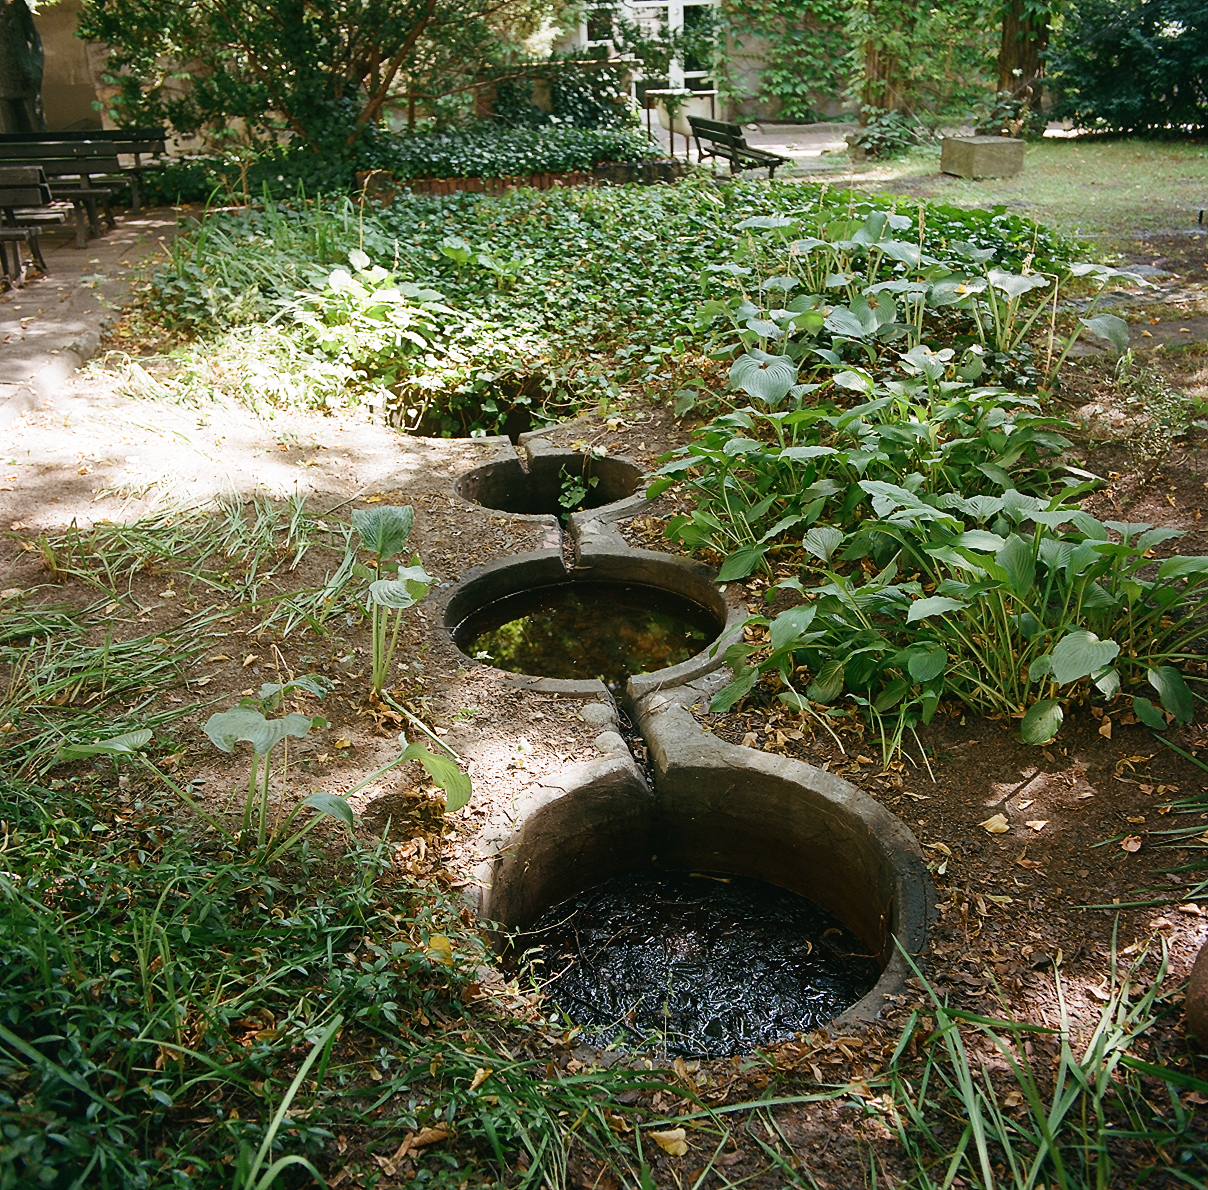 Hydrobotanical teaching apparatus from 1963 in the courtyard of the Faculty of Architecture, Warsaw University of Technology, 55 Koszykowa Street, Warsaw. The pond requires minor repairs and replanting.